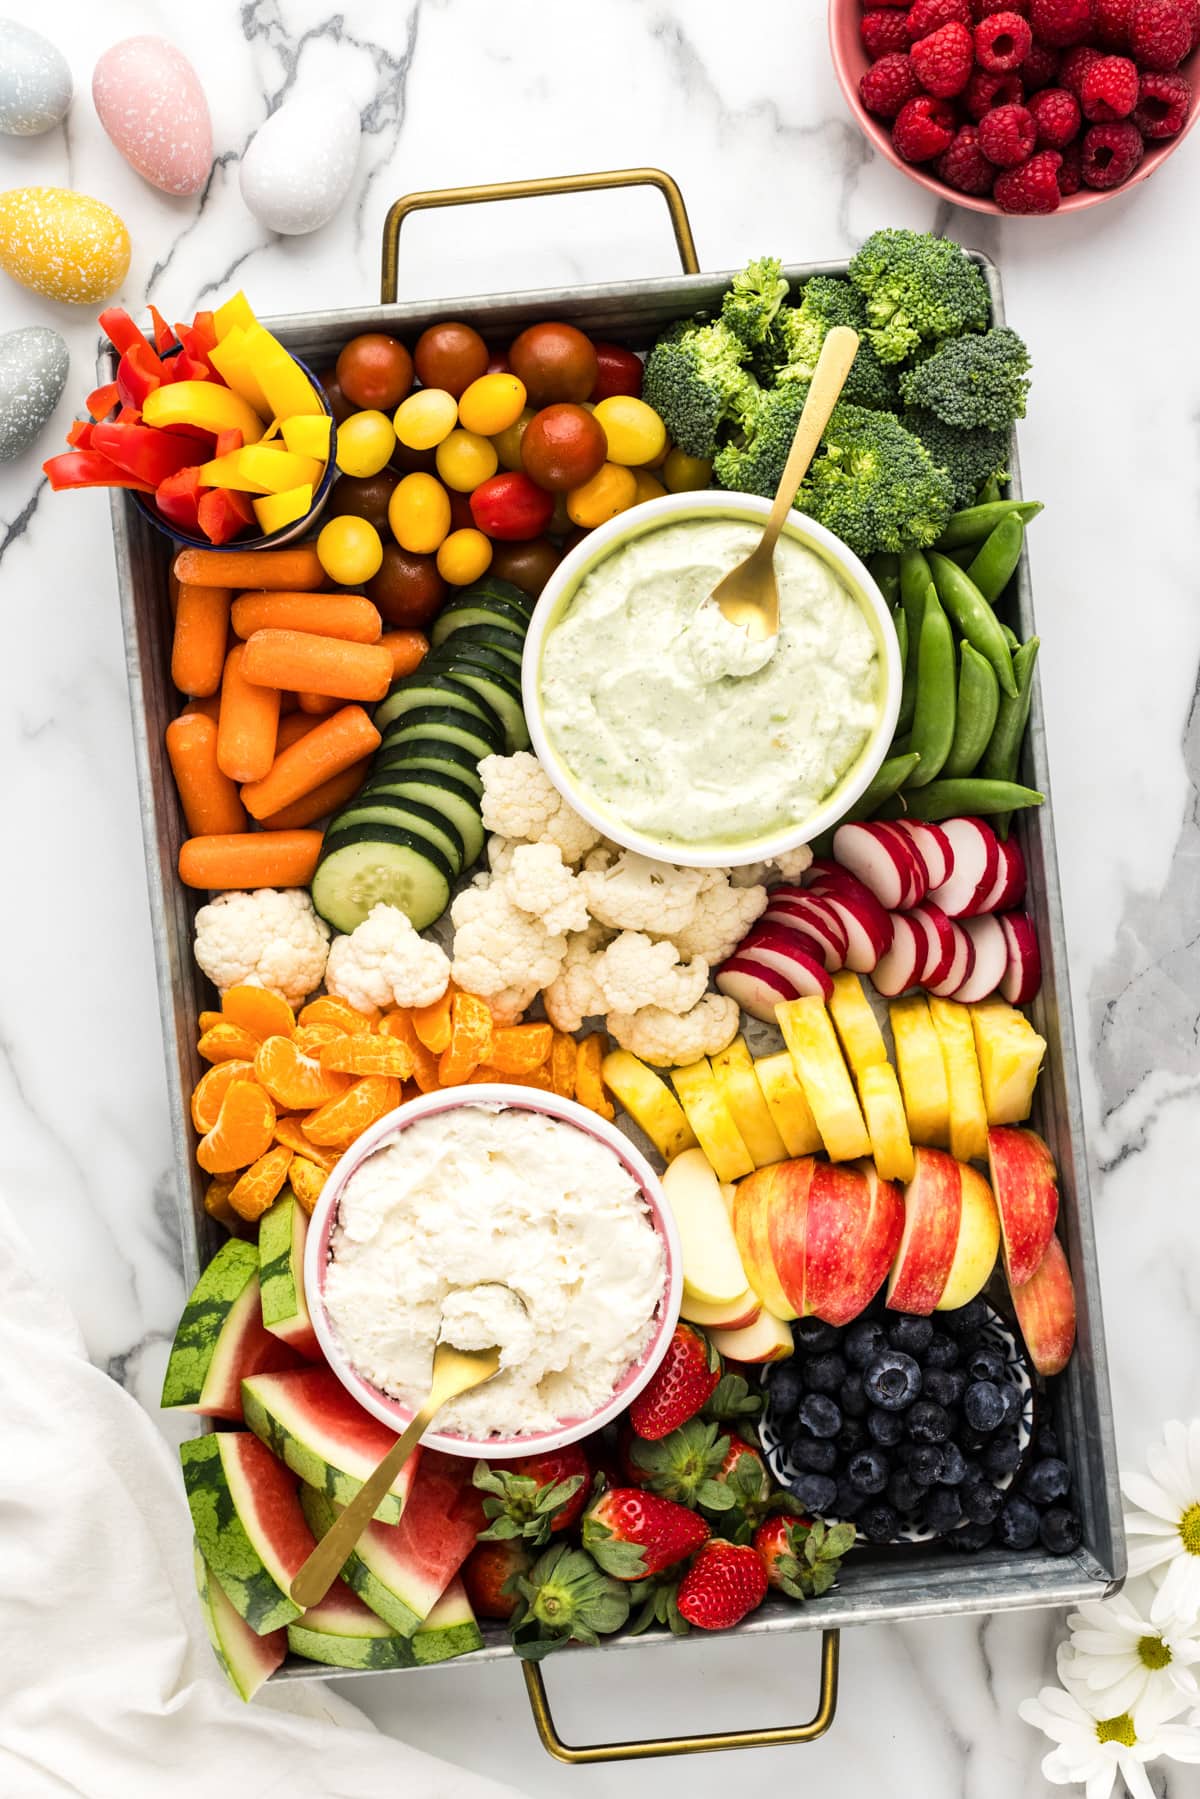 Top view of an Easter charcuterie board covered in fruits, veggies, and dips.